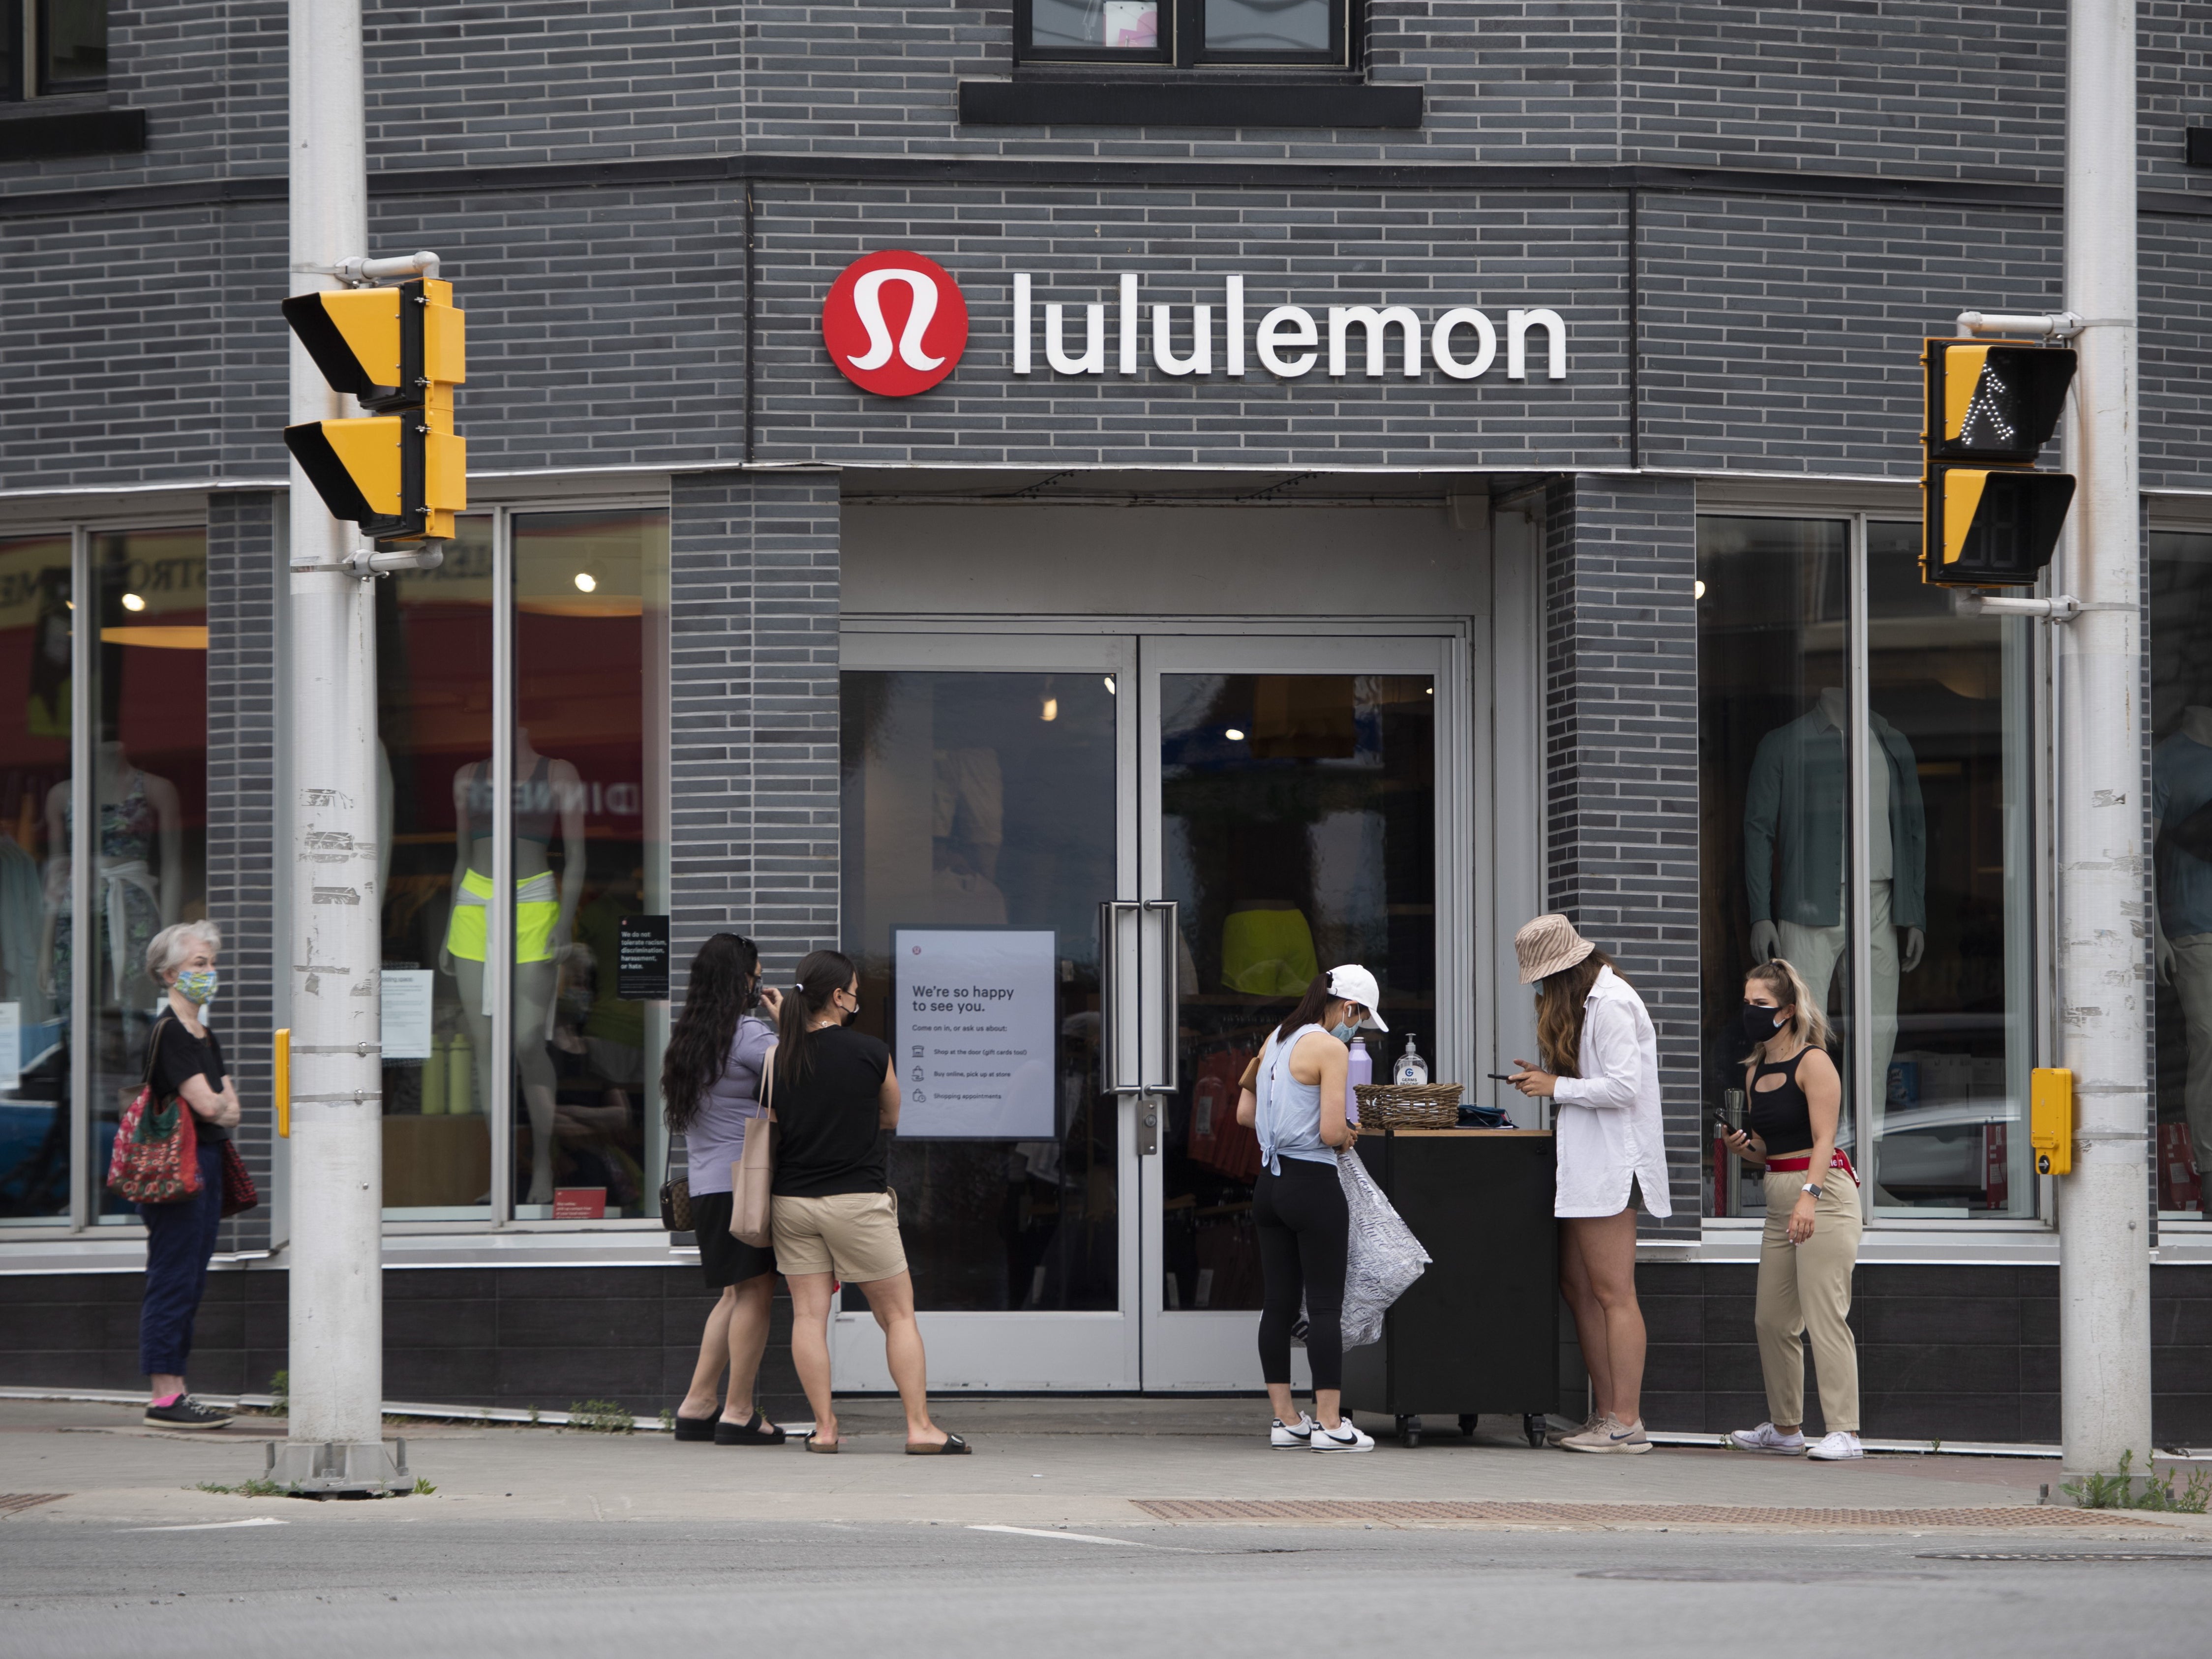 Come Shopping At a Lululemon Outlet With Me !!